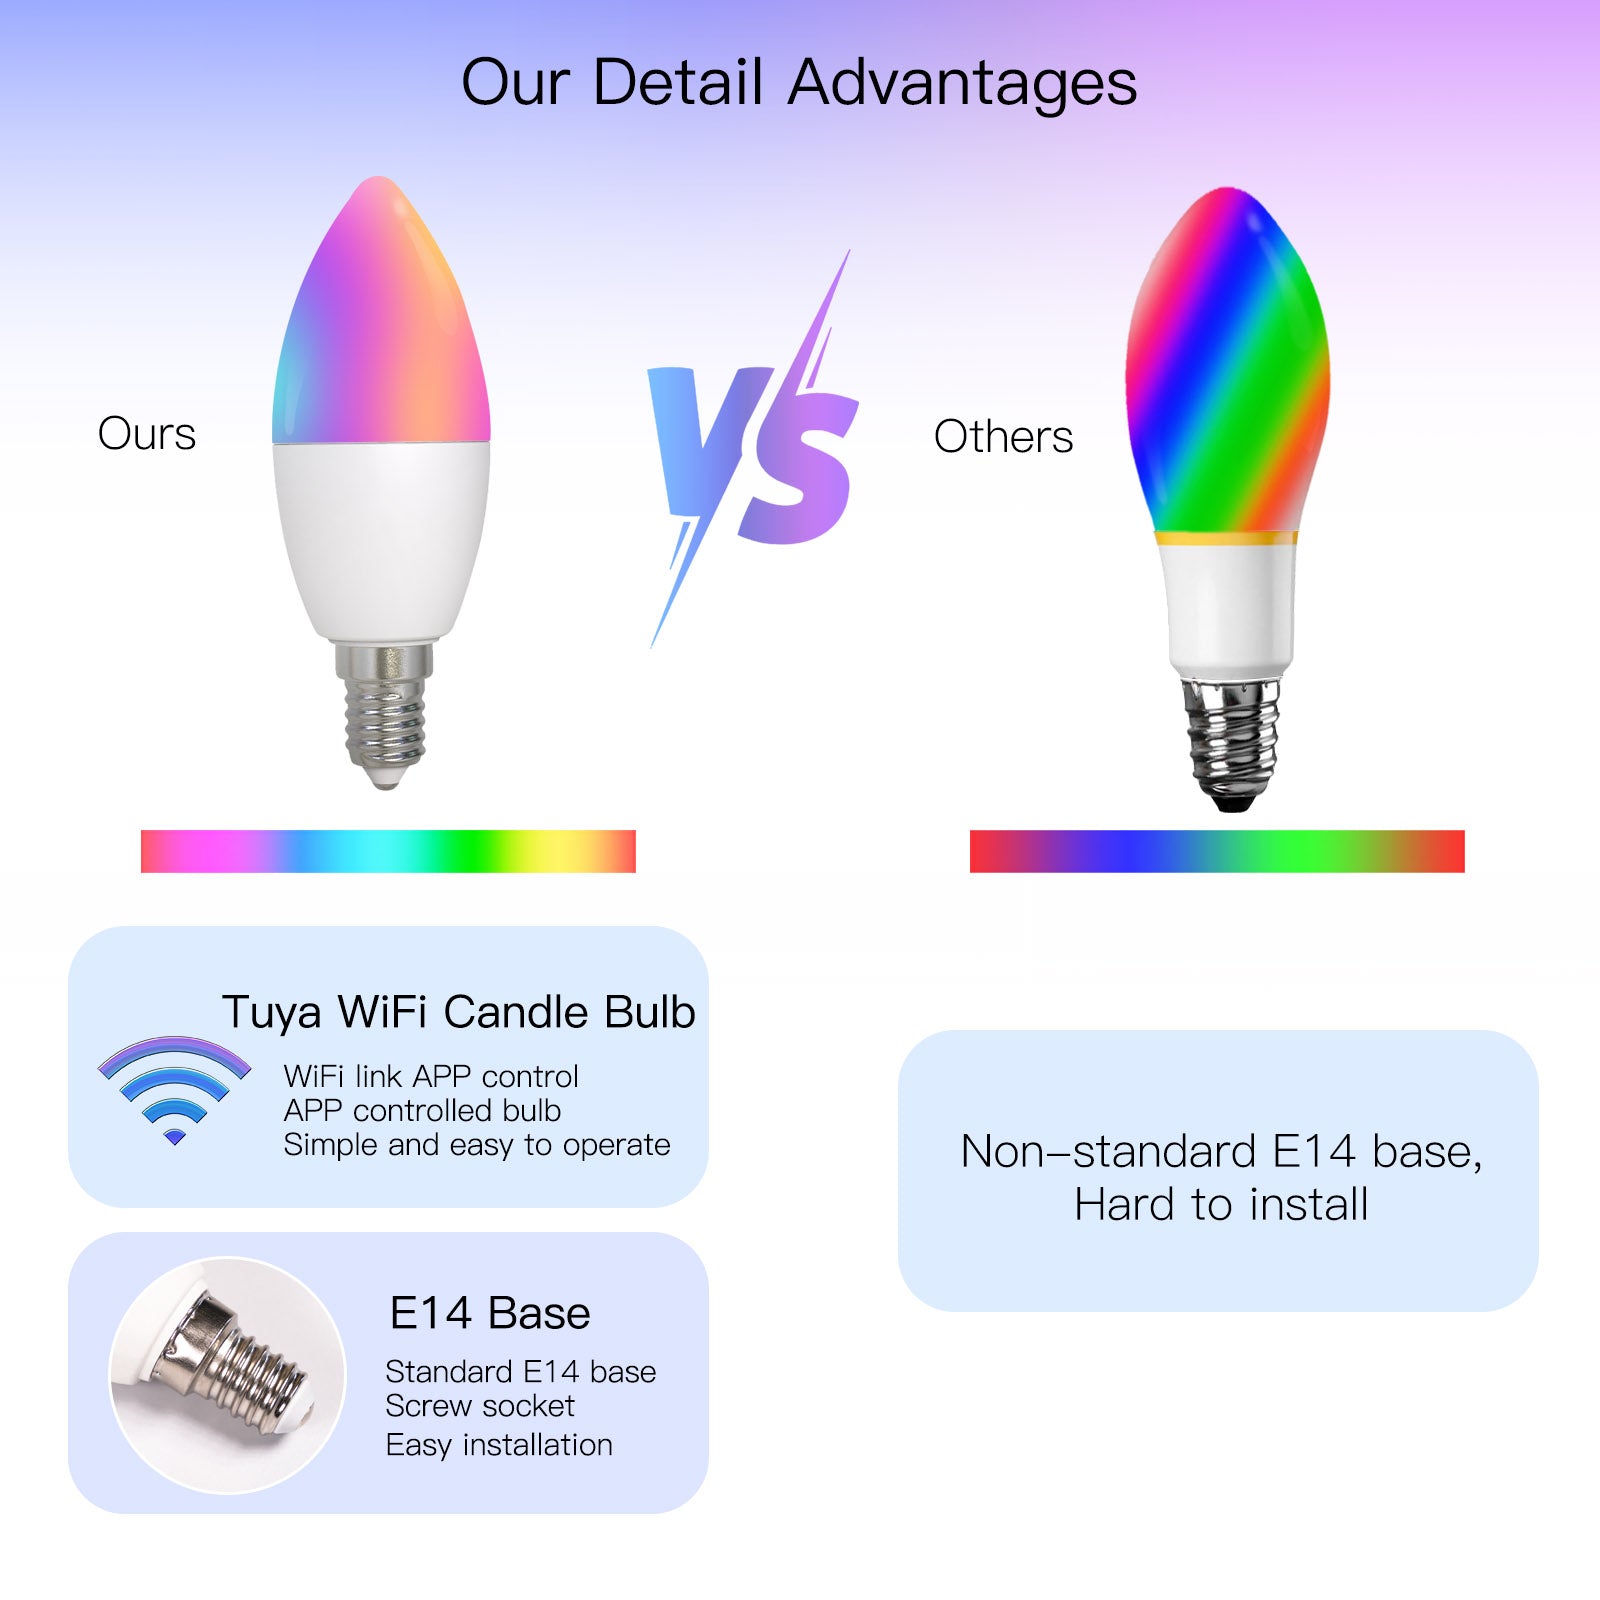 WiFi link APP control APP controlled bulb Simple and easy to operate